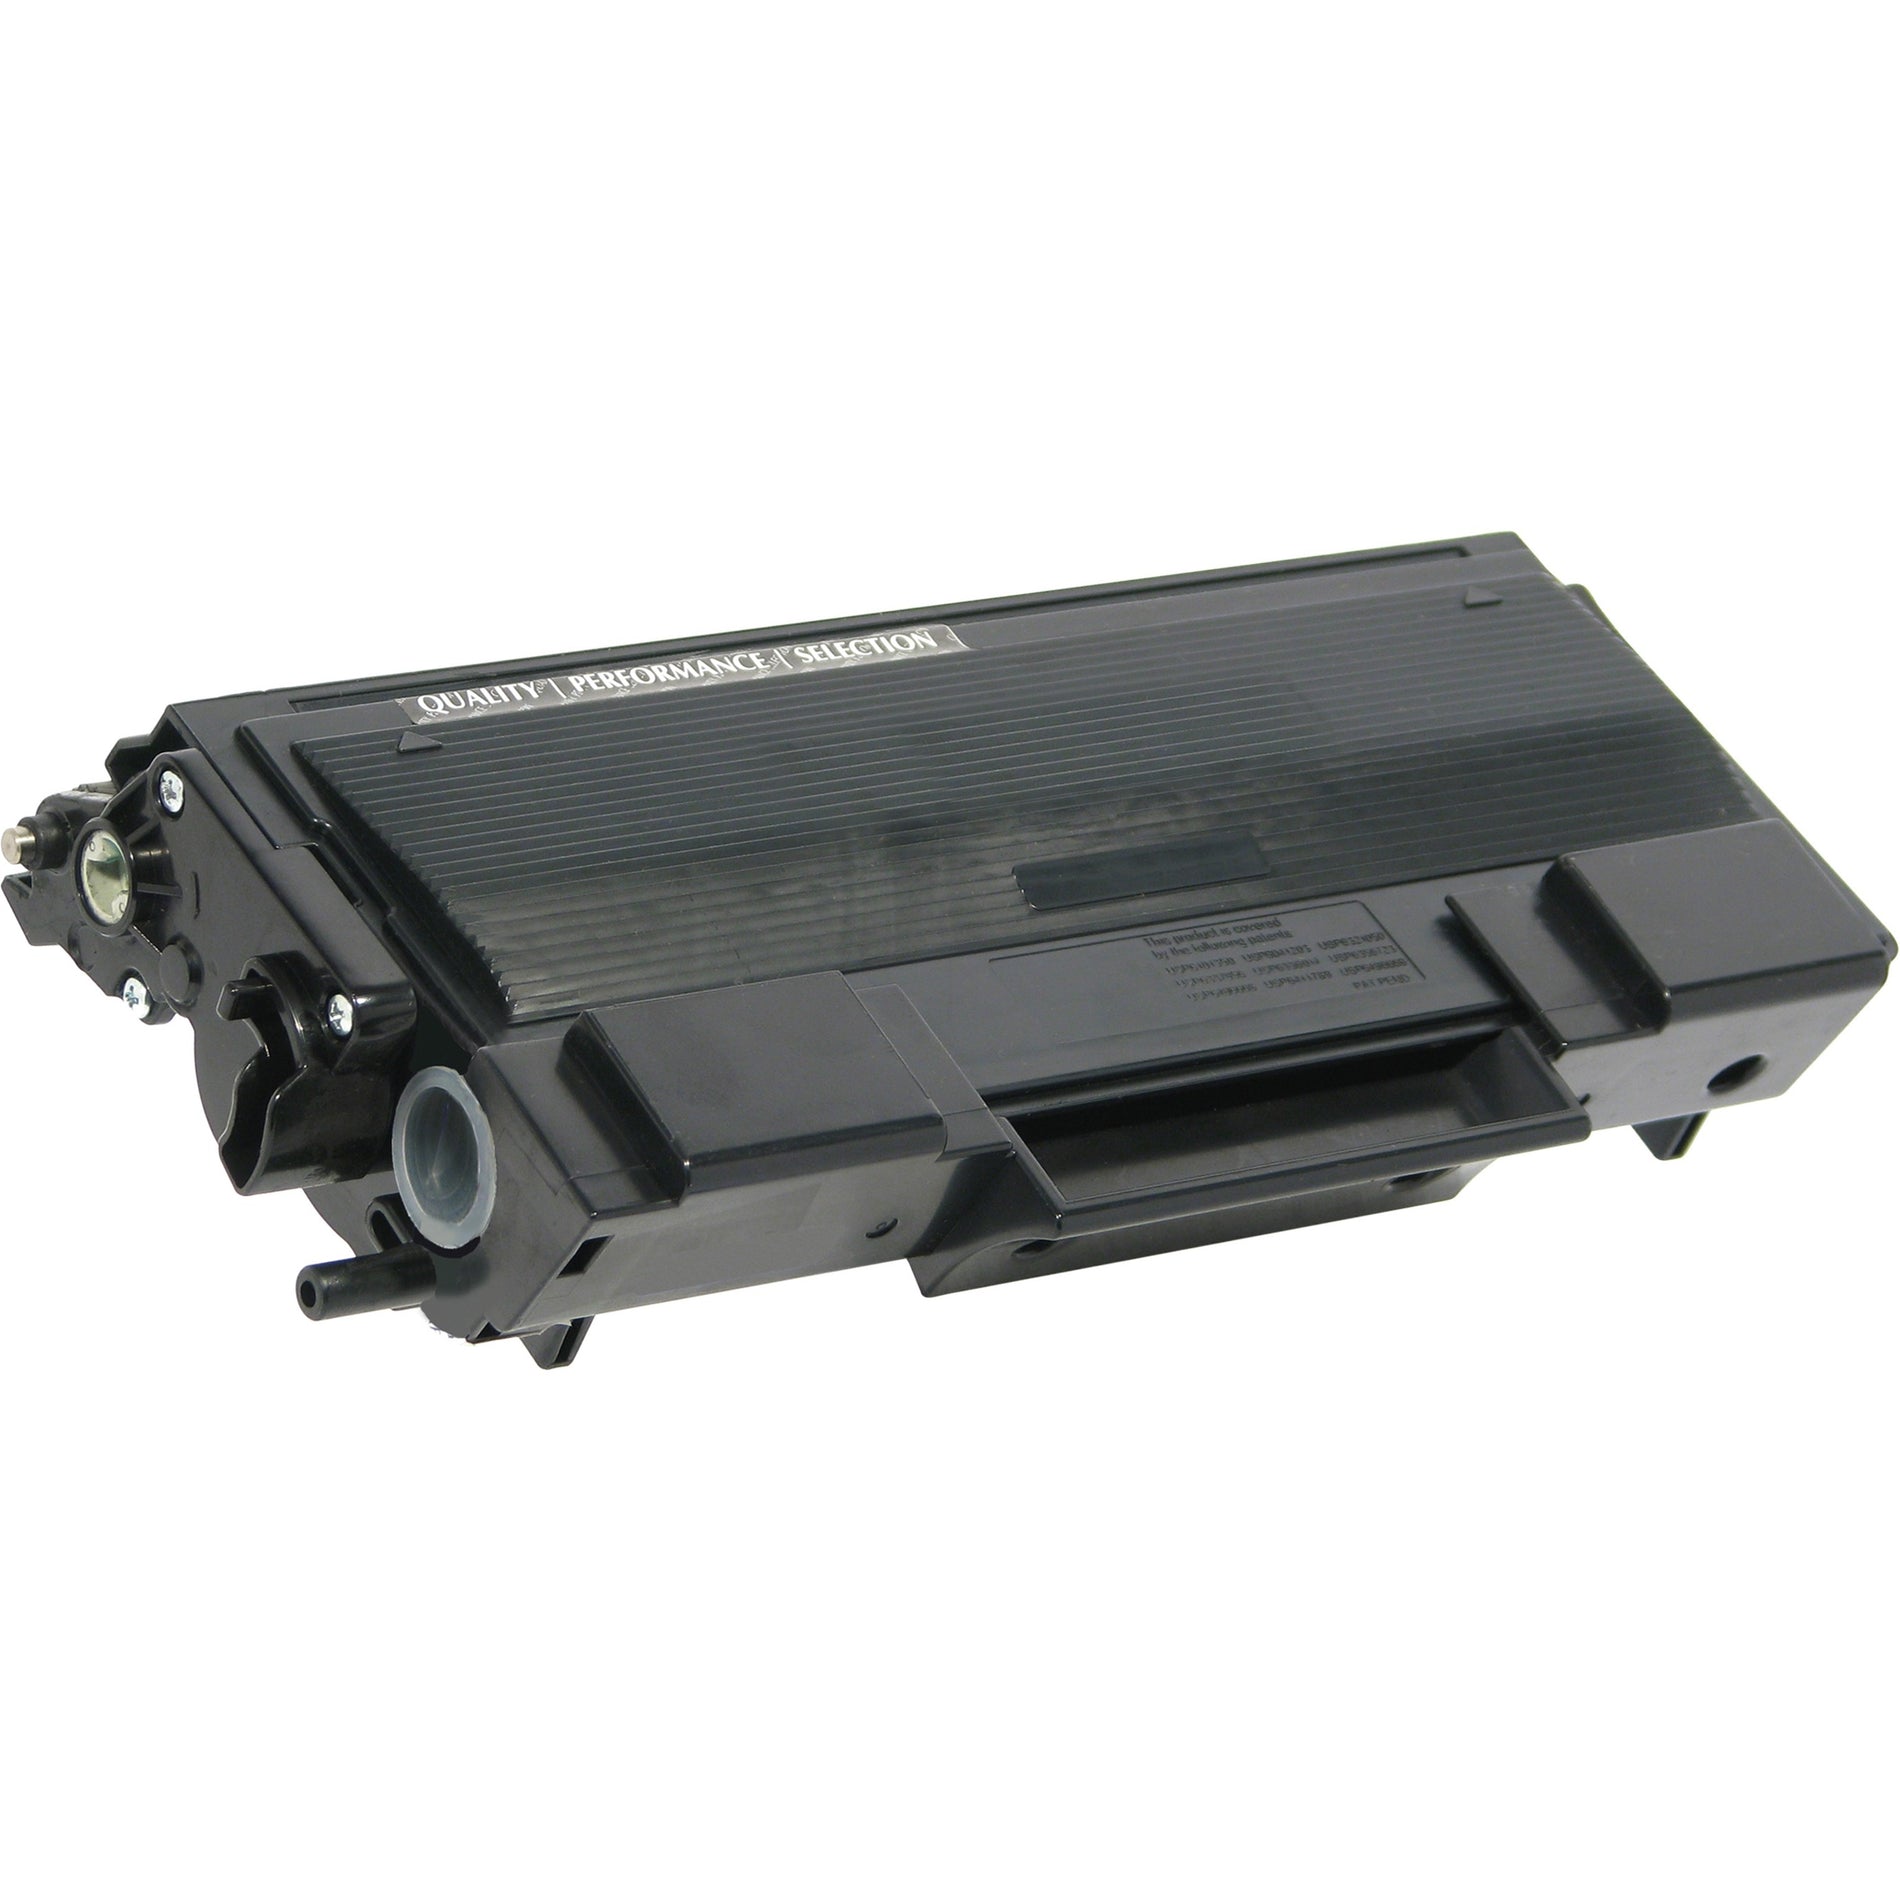 V7 TBK2N650 Remanufactured High Yield Toner Cartridge for Brother TN650 - 8000 Pages, Black